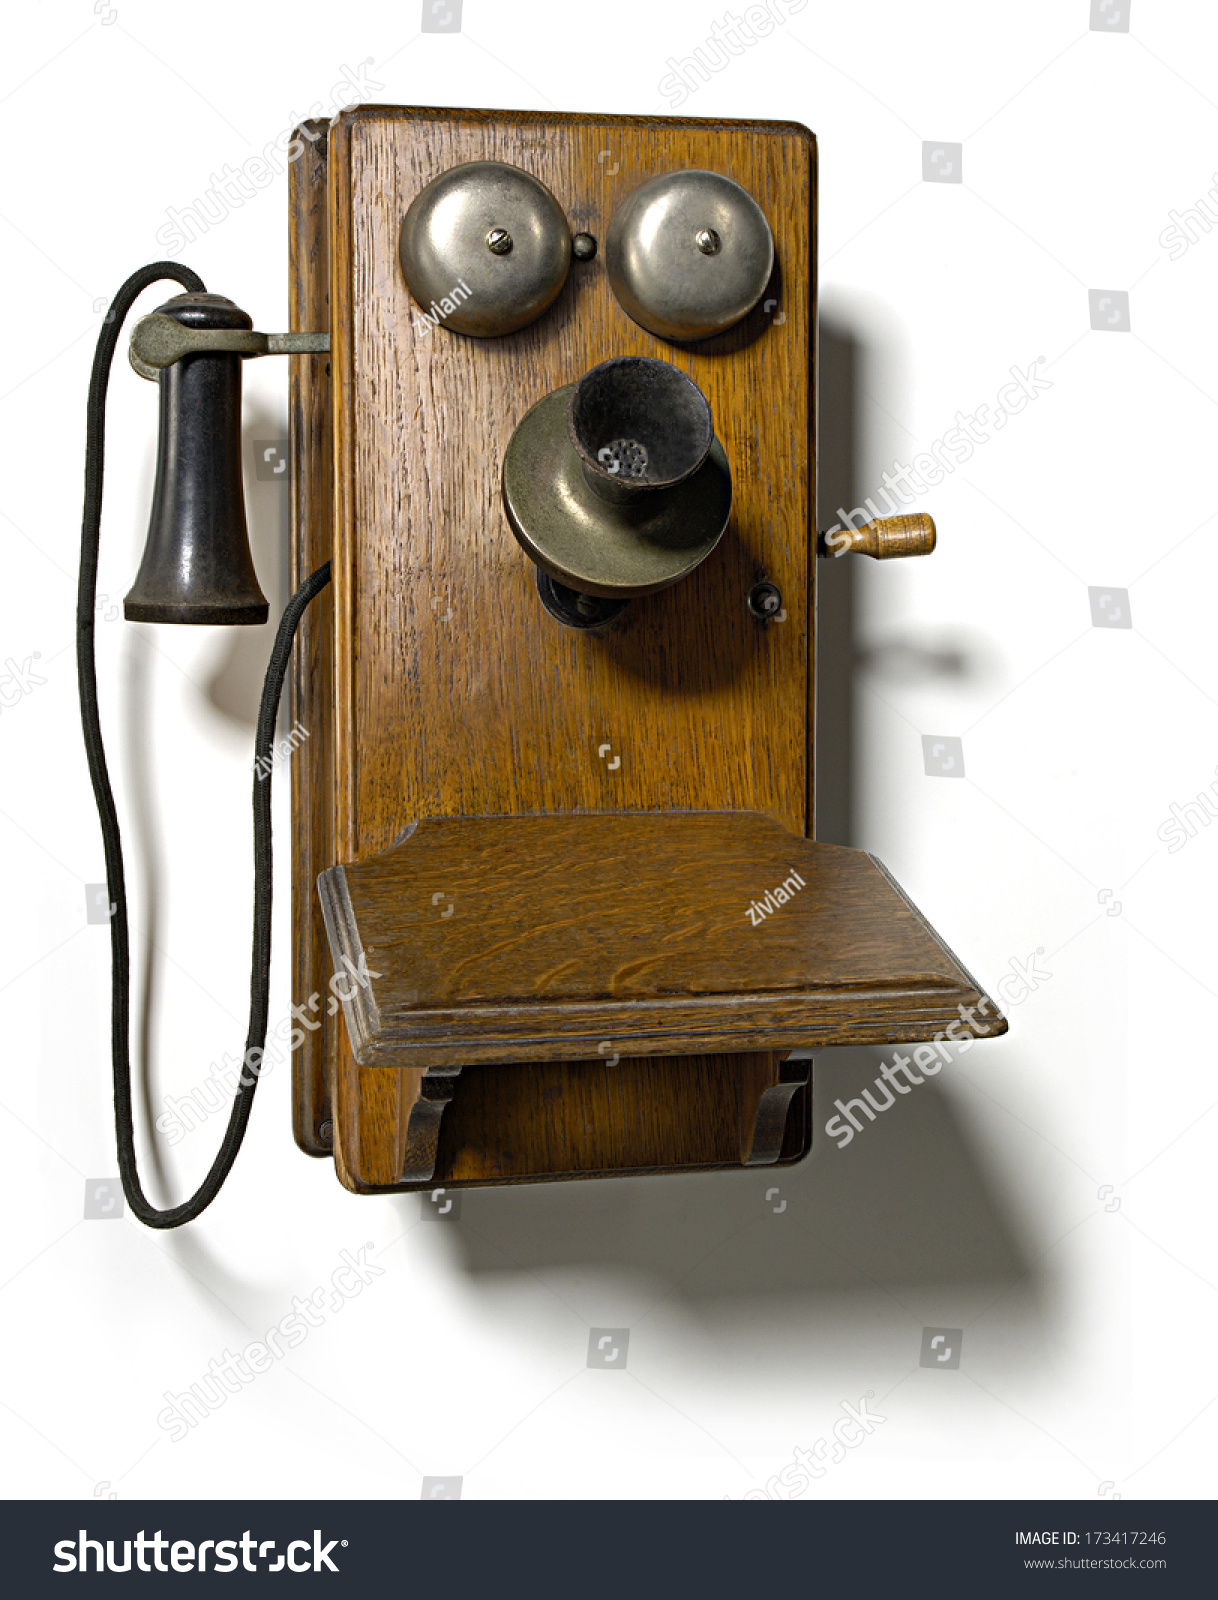 Old Telephone Stock Photo (Royalty Free) 173417246 - Shutterstock